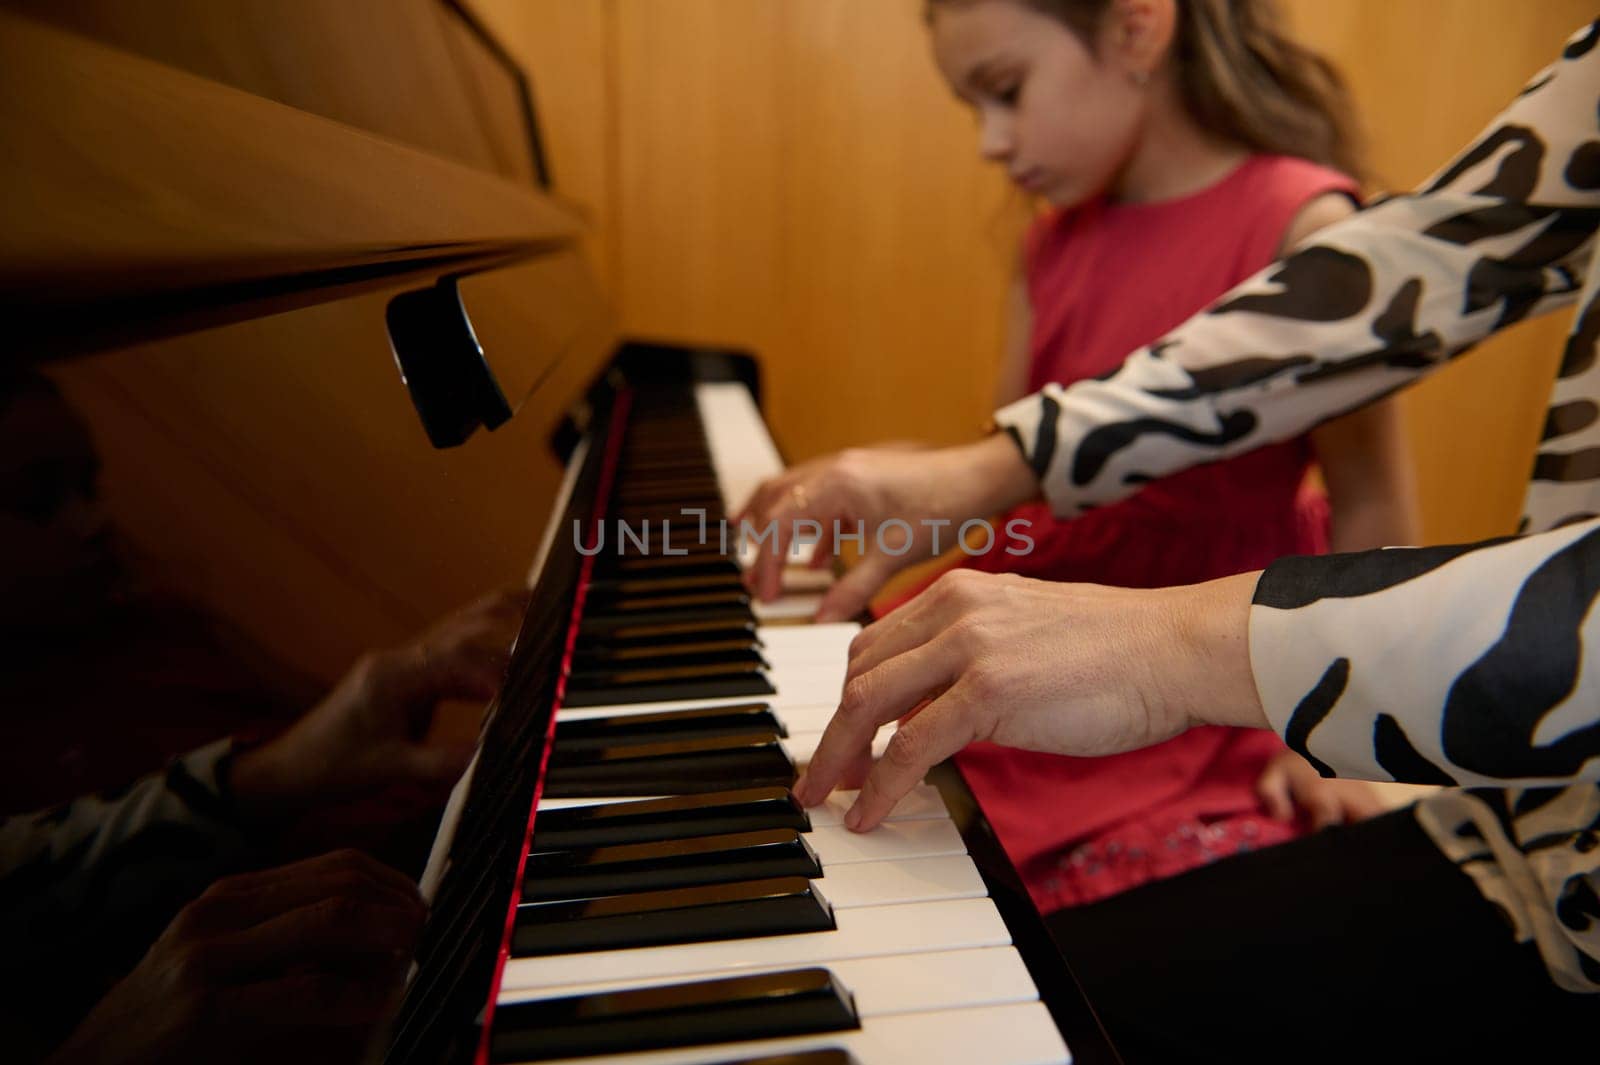 Close-up hands of a musician pianist teacher giving piano lesson, passionately playing the keys, creating melody, feeling the rhythm of music. Musical education and talent development in progress